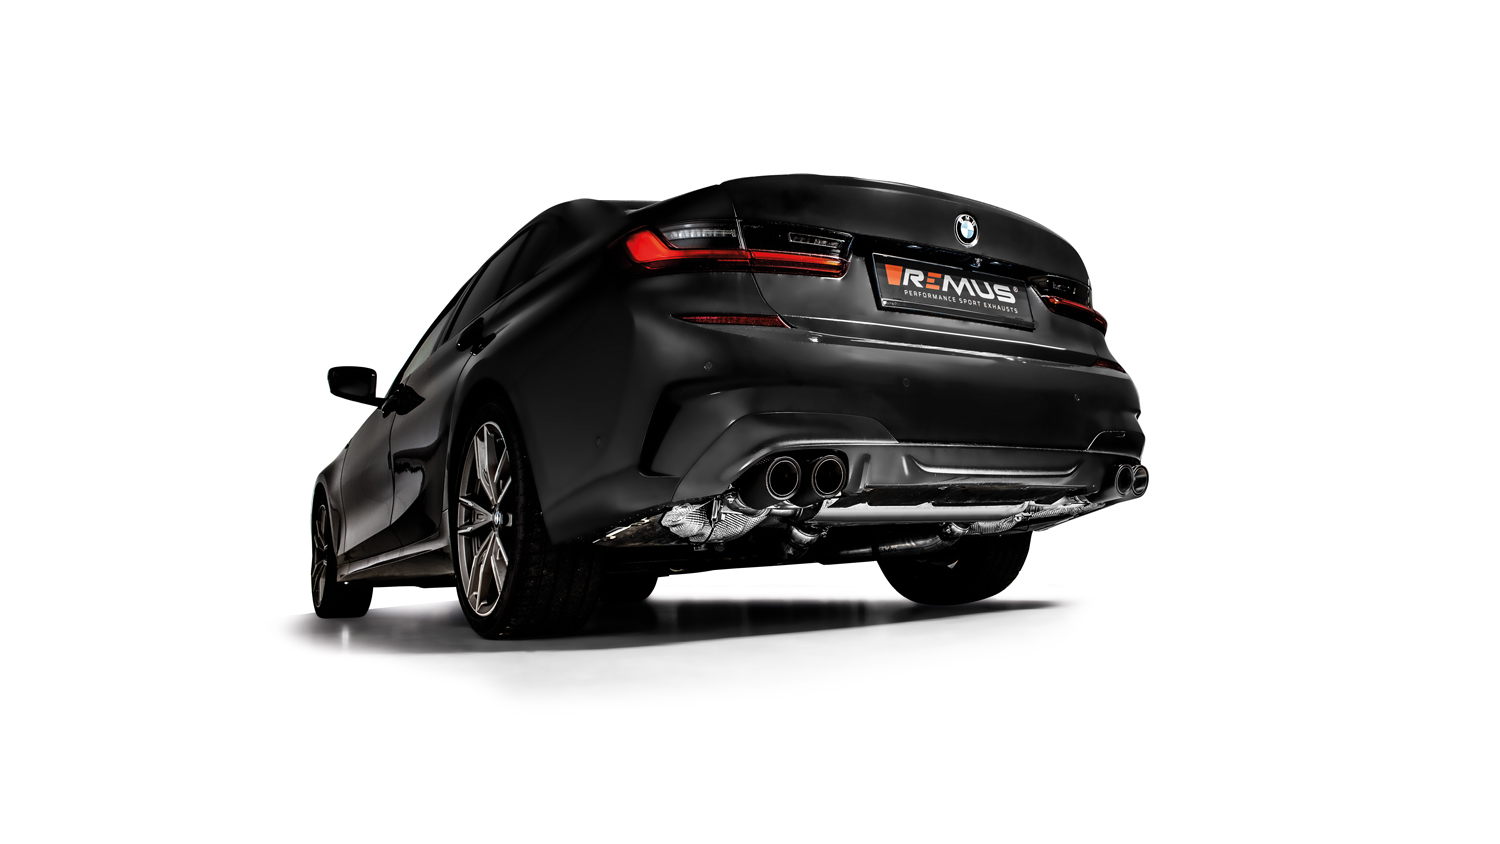 Axle-back-system L/R: Sport exhaust, with 2 integrated valves, incl